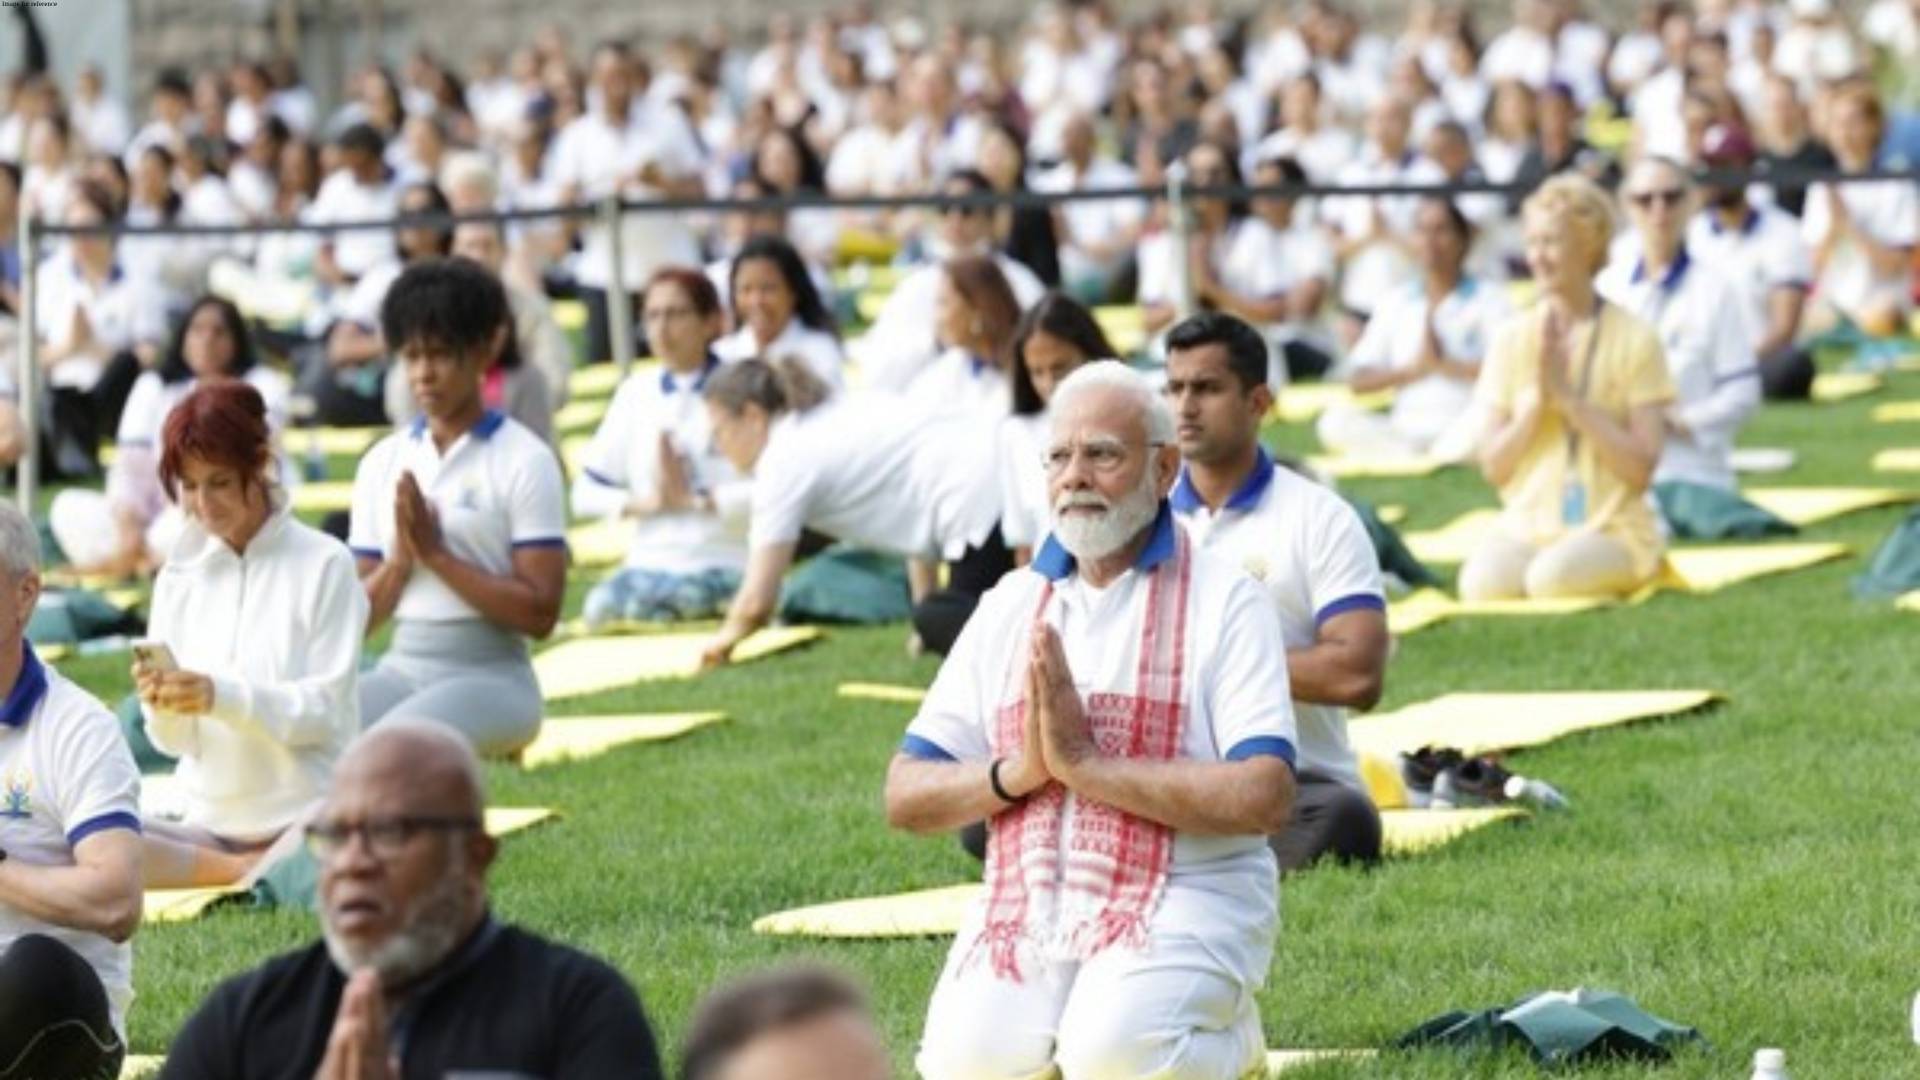 PM Modi urges people to make yoga an integral part of their lives ahead of International Yoga Day